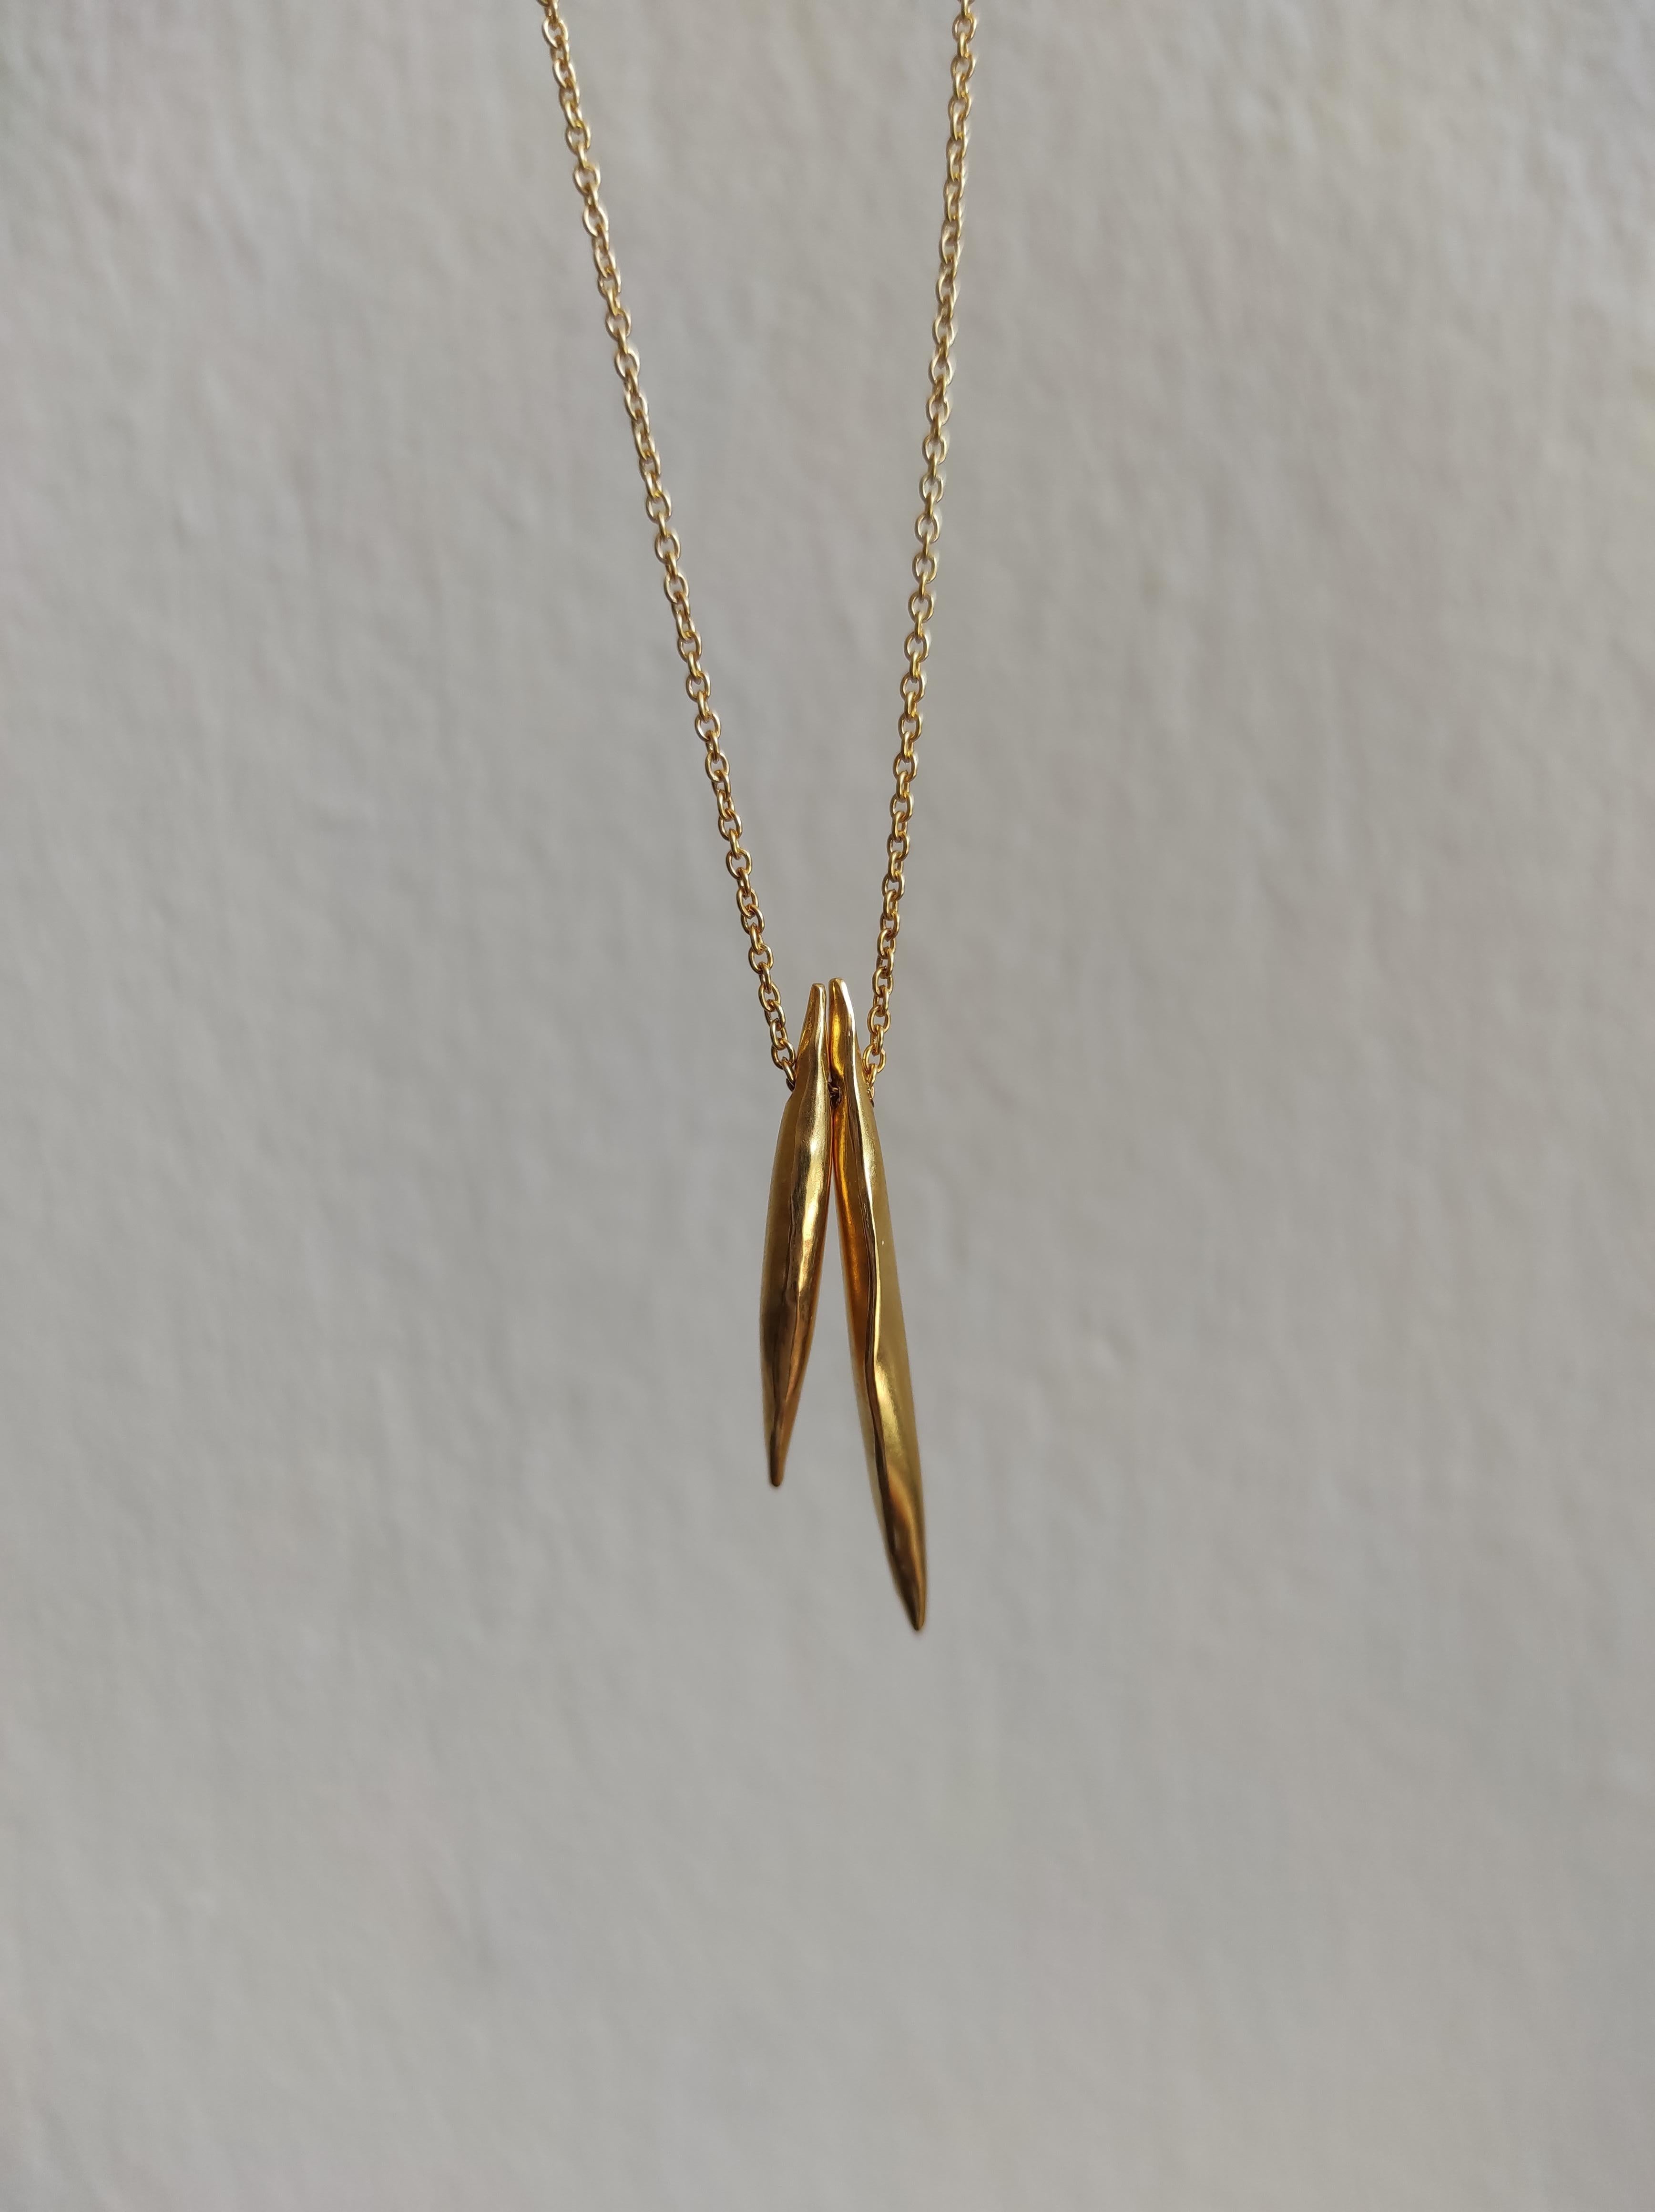 Contemporary Silver Chain Necklace Gold Plated For Sale